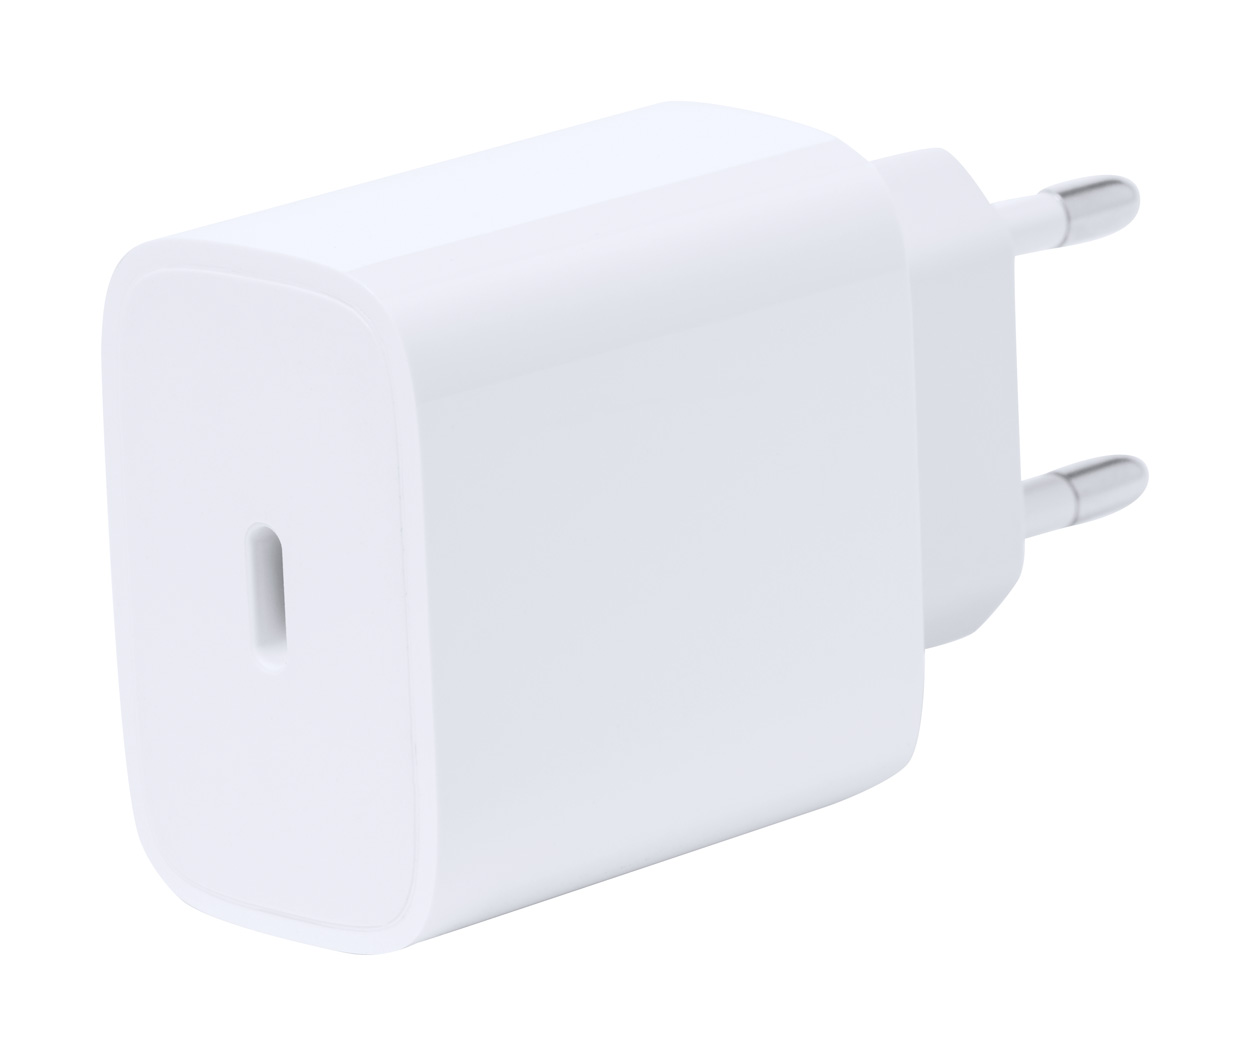 Morelo USB wall charger - white